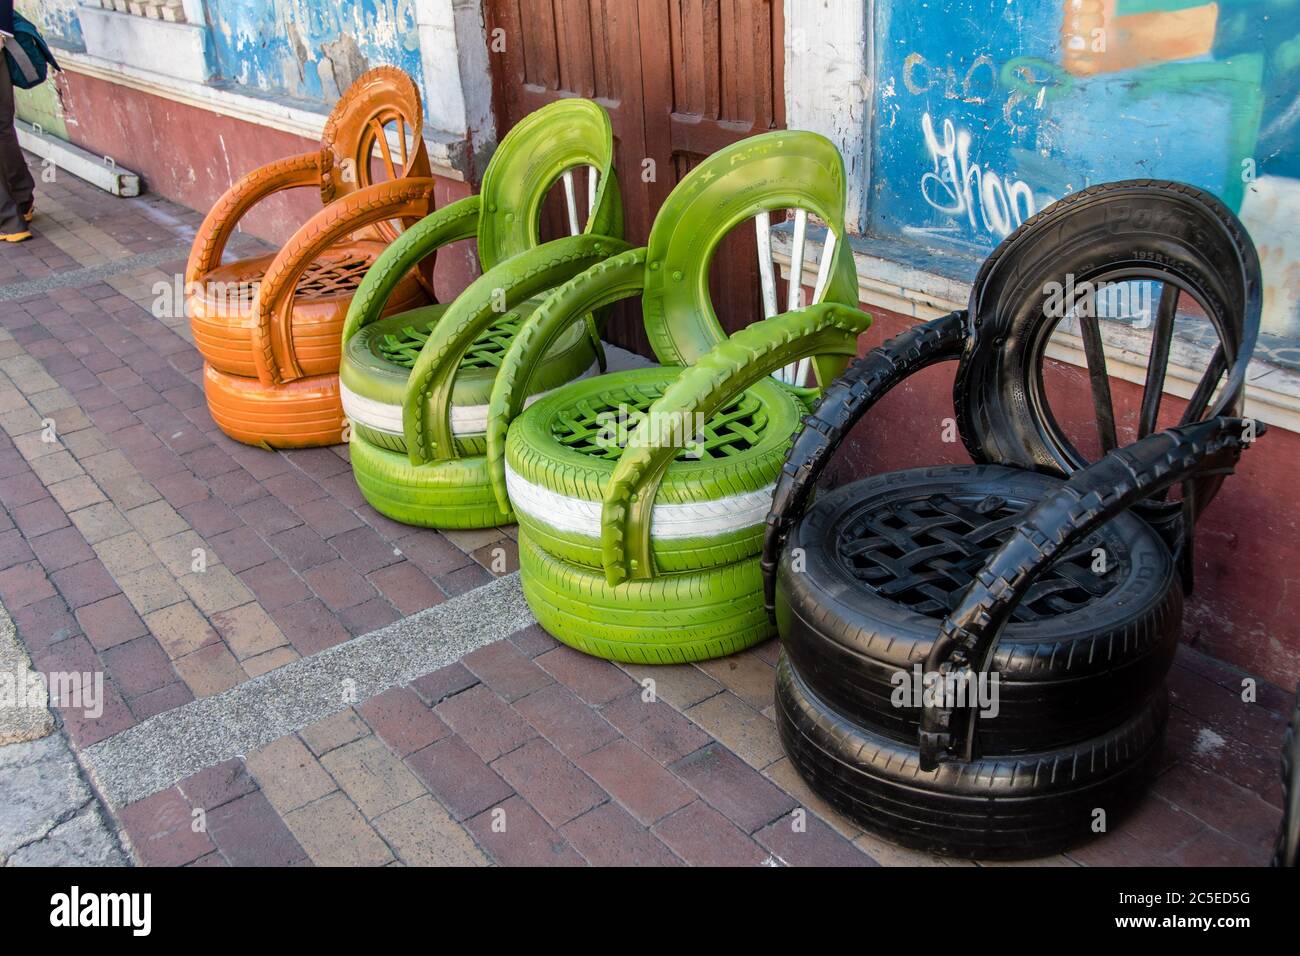 Old tires are recycled and reused to create nice garden chairs, in Guano, near Riobamba, Ecuador Stock Photo